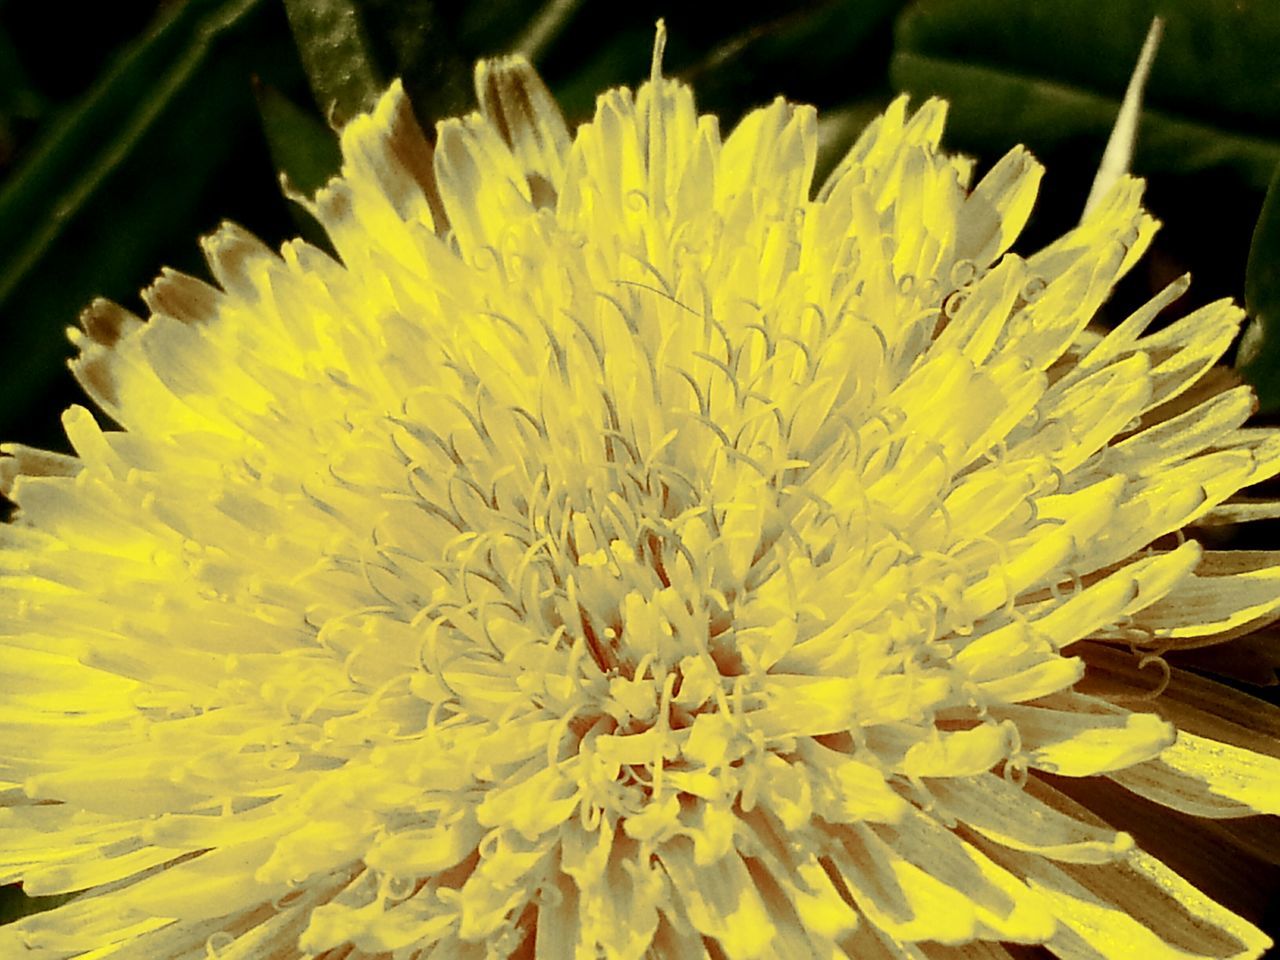 flower, flower head, freshness, petal, fragility, yellow, single flower, growth, beauty in nature, close-up, nature, pollen, blooming, plant, dandelion, stamen, in bloom, macro, focus on foreground, outdoors